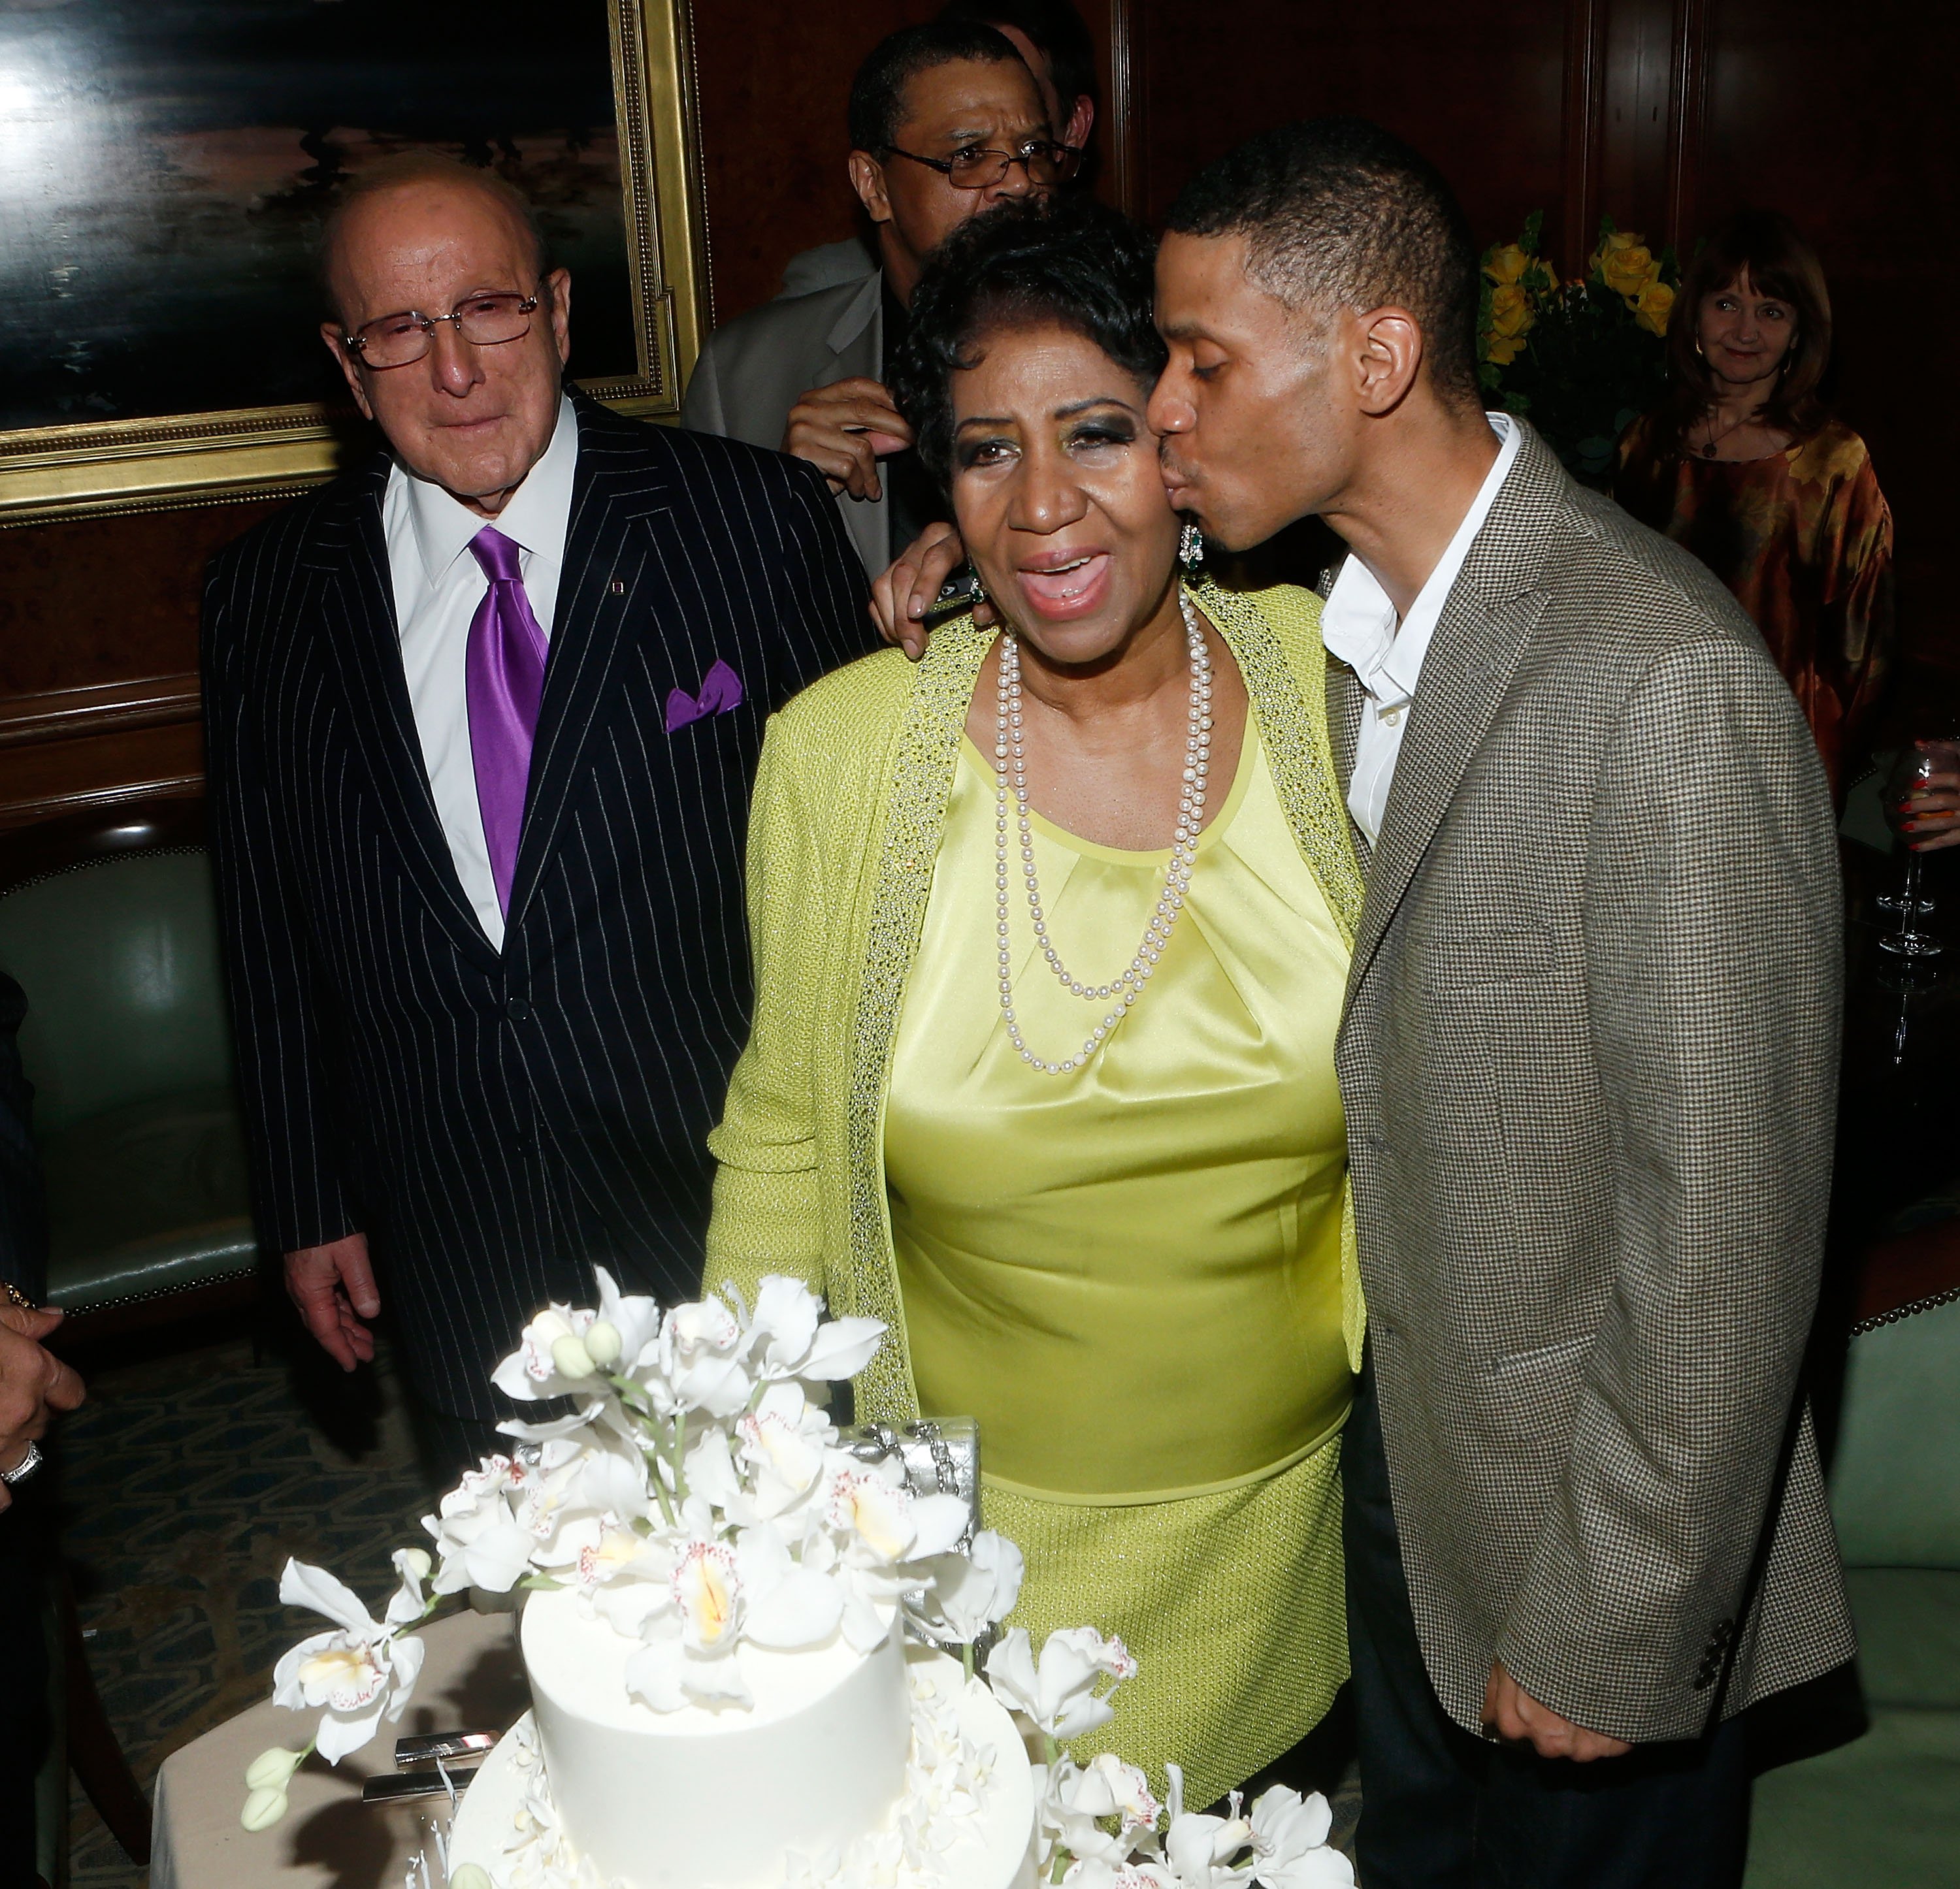 Aretha Franklin & son Kecalf Cunningham at her 72nd Birthday Celebration in New York City on March 22, 2014. |Photo: Getty Images